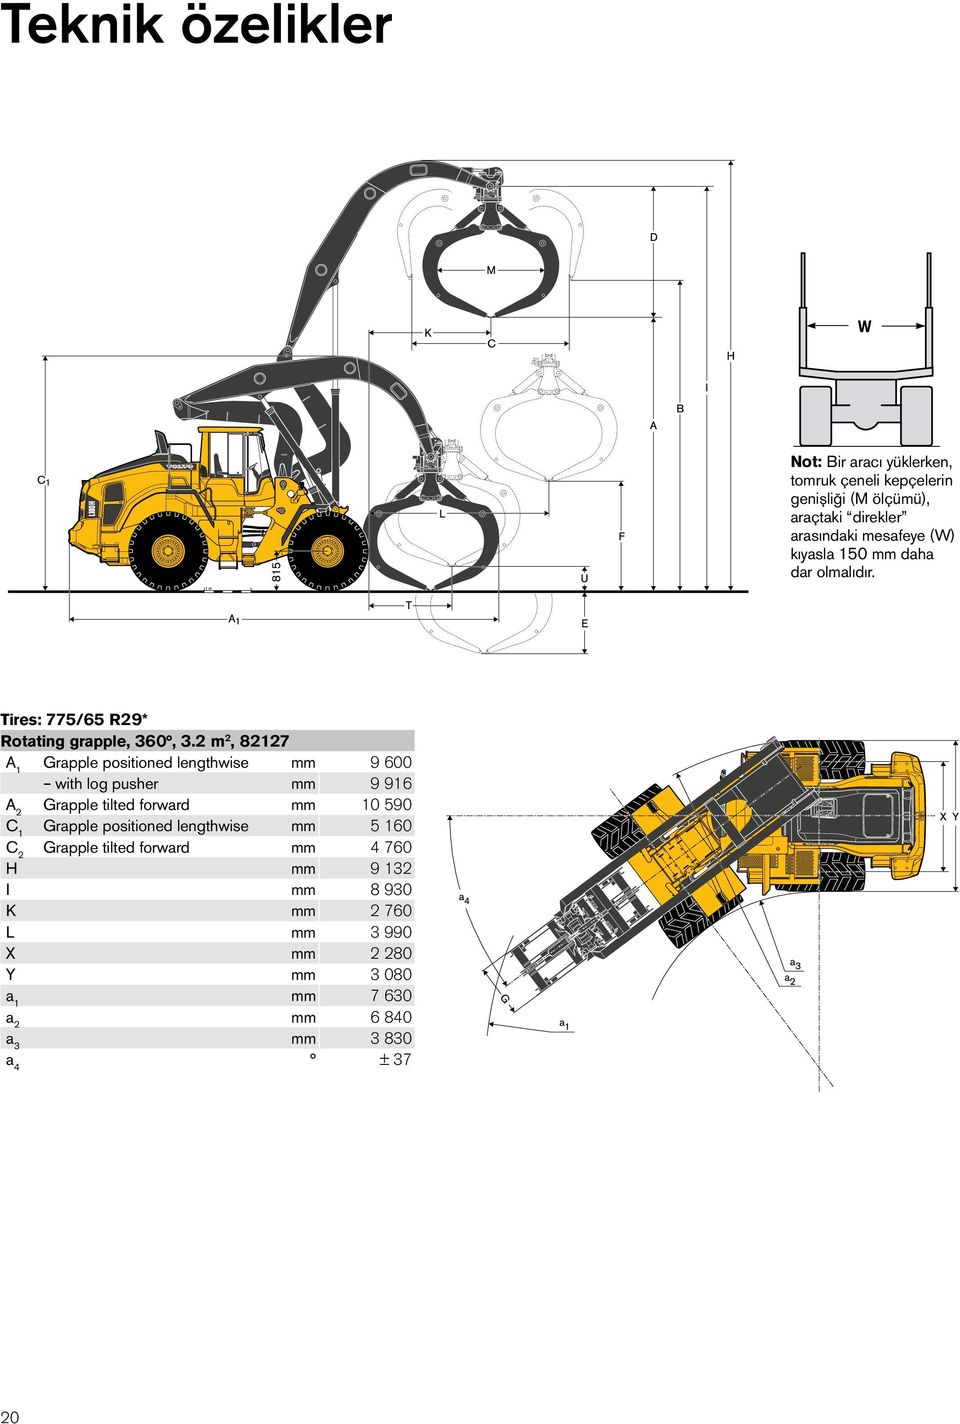 2 m 2, 82127 A 1 Grapple positioned lengthwise mm 9 600 with log pusher mm 9 916 A 2 Grapple tilted forward mm 10 590 C 1 Grapple